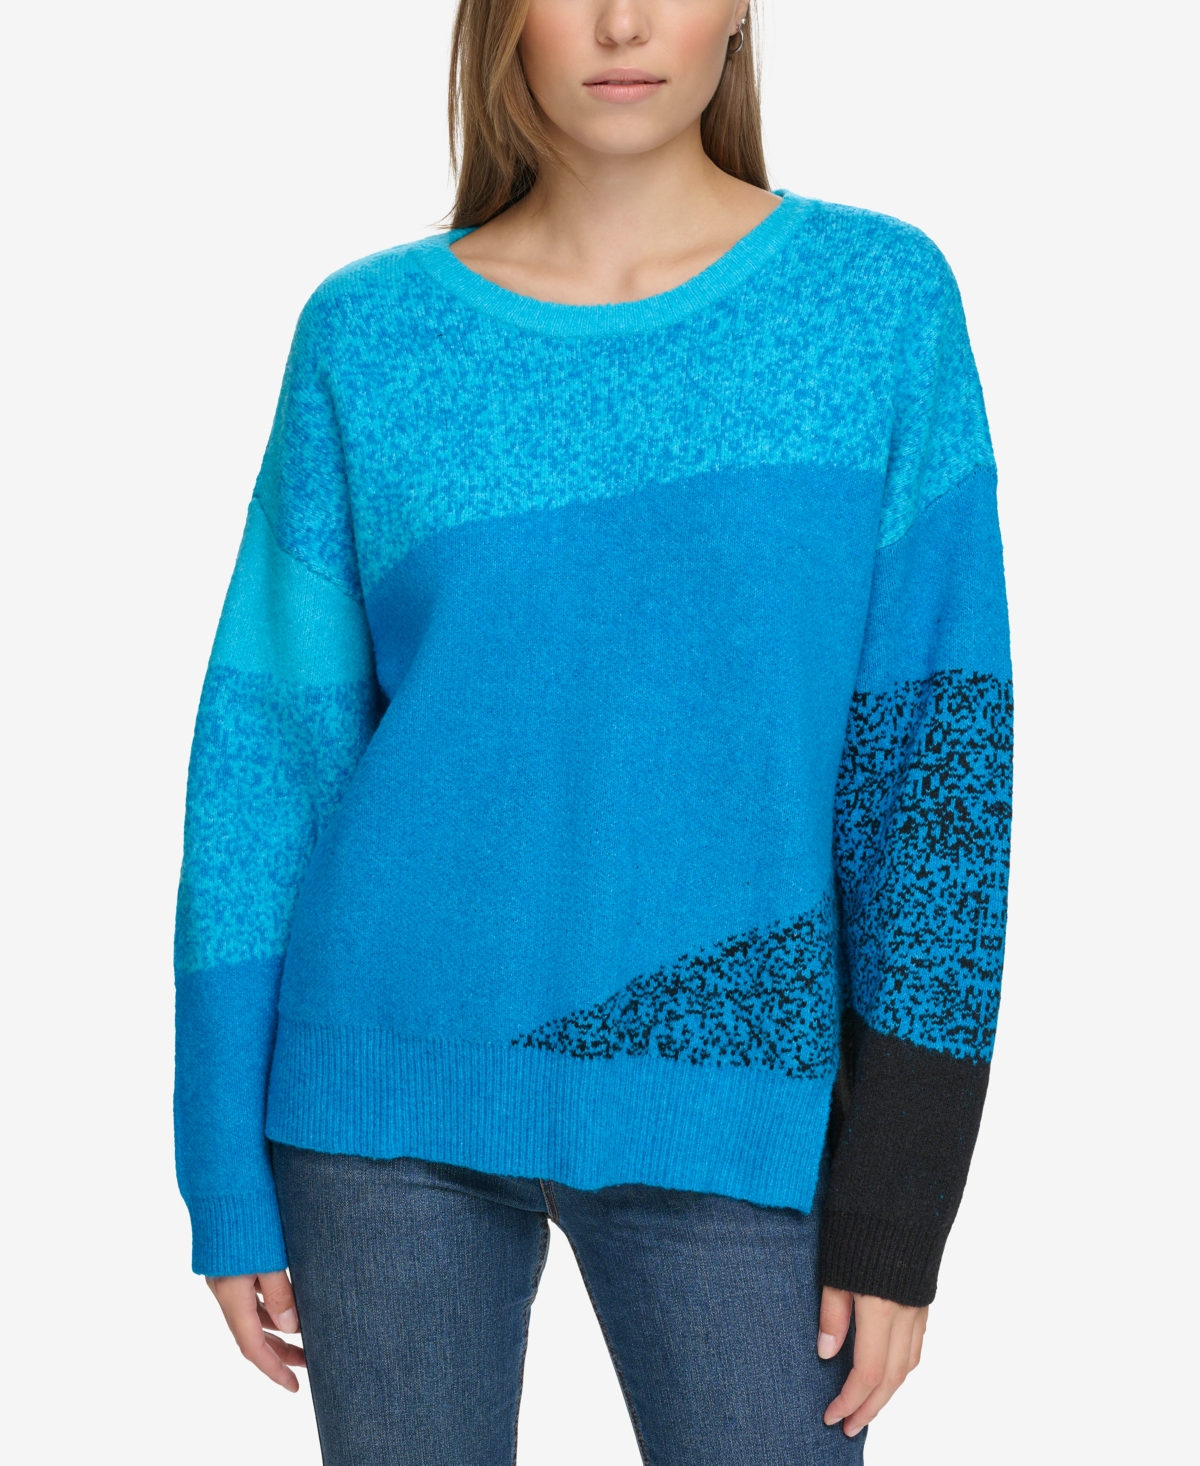 Women's Mixed-Knit Drop-Sleeve Sweater - Electric Blue Combo